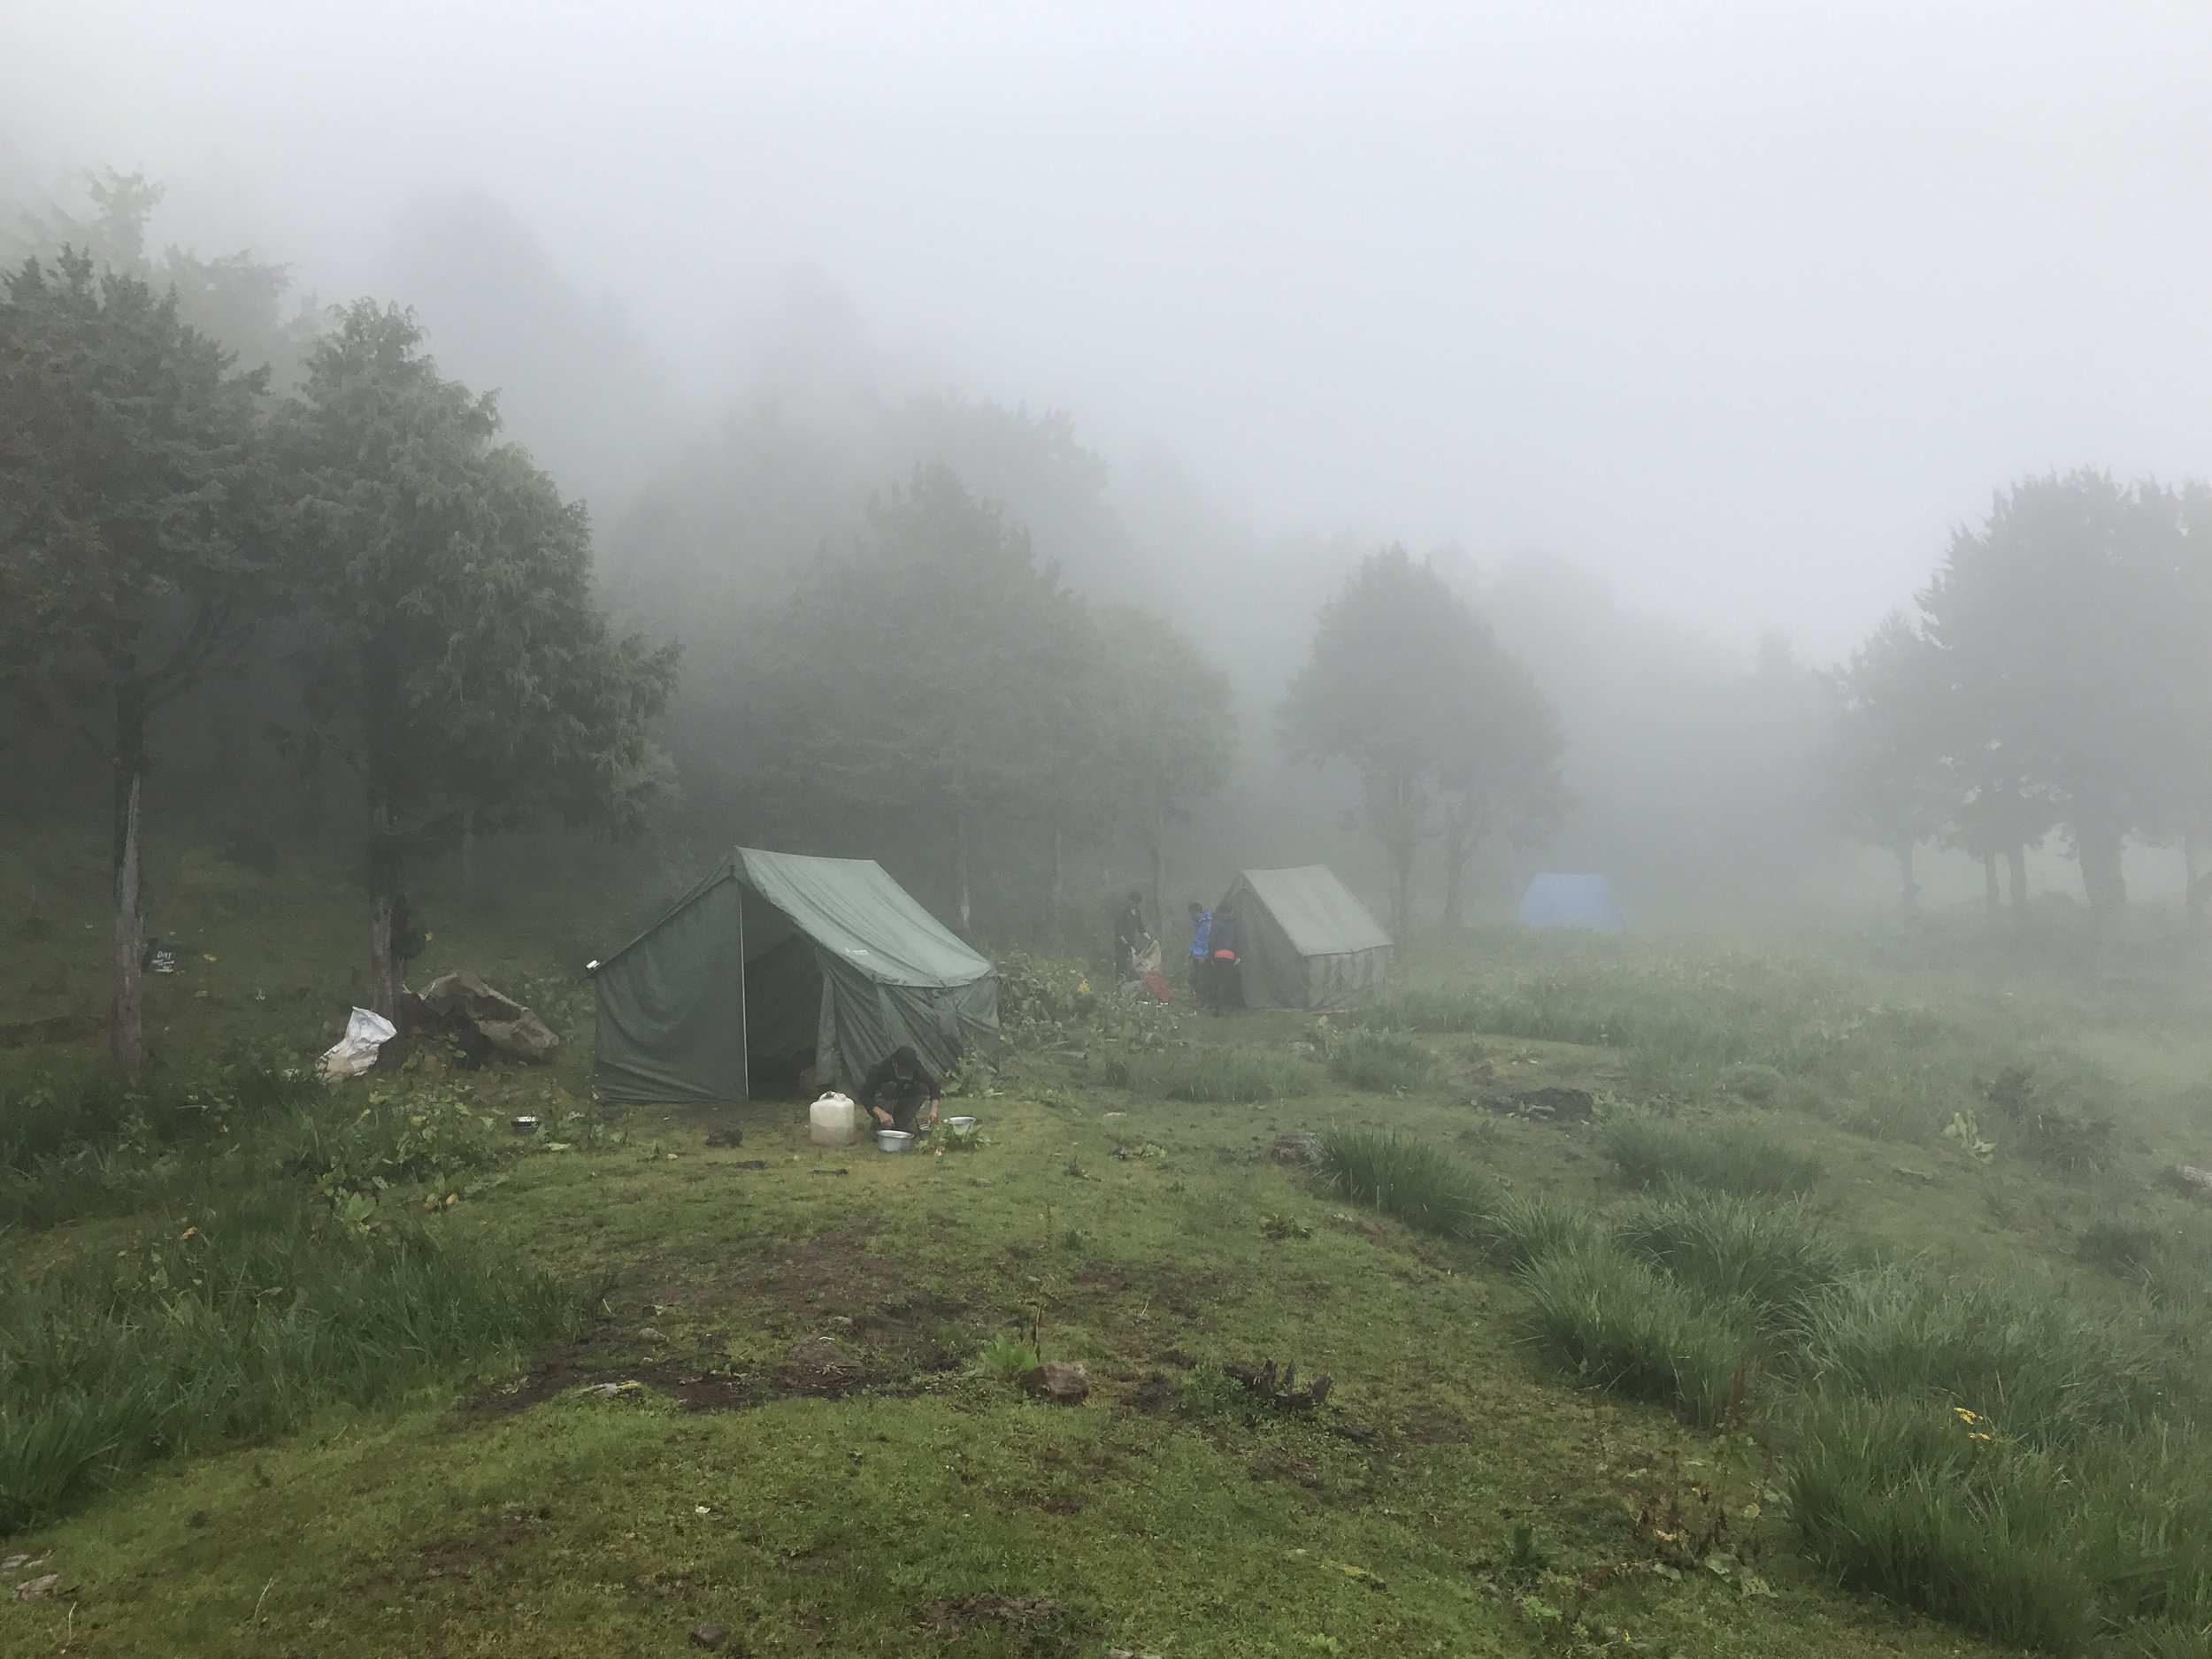  A little tent city in the mist - our camp for the first night. 